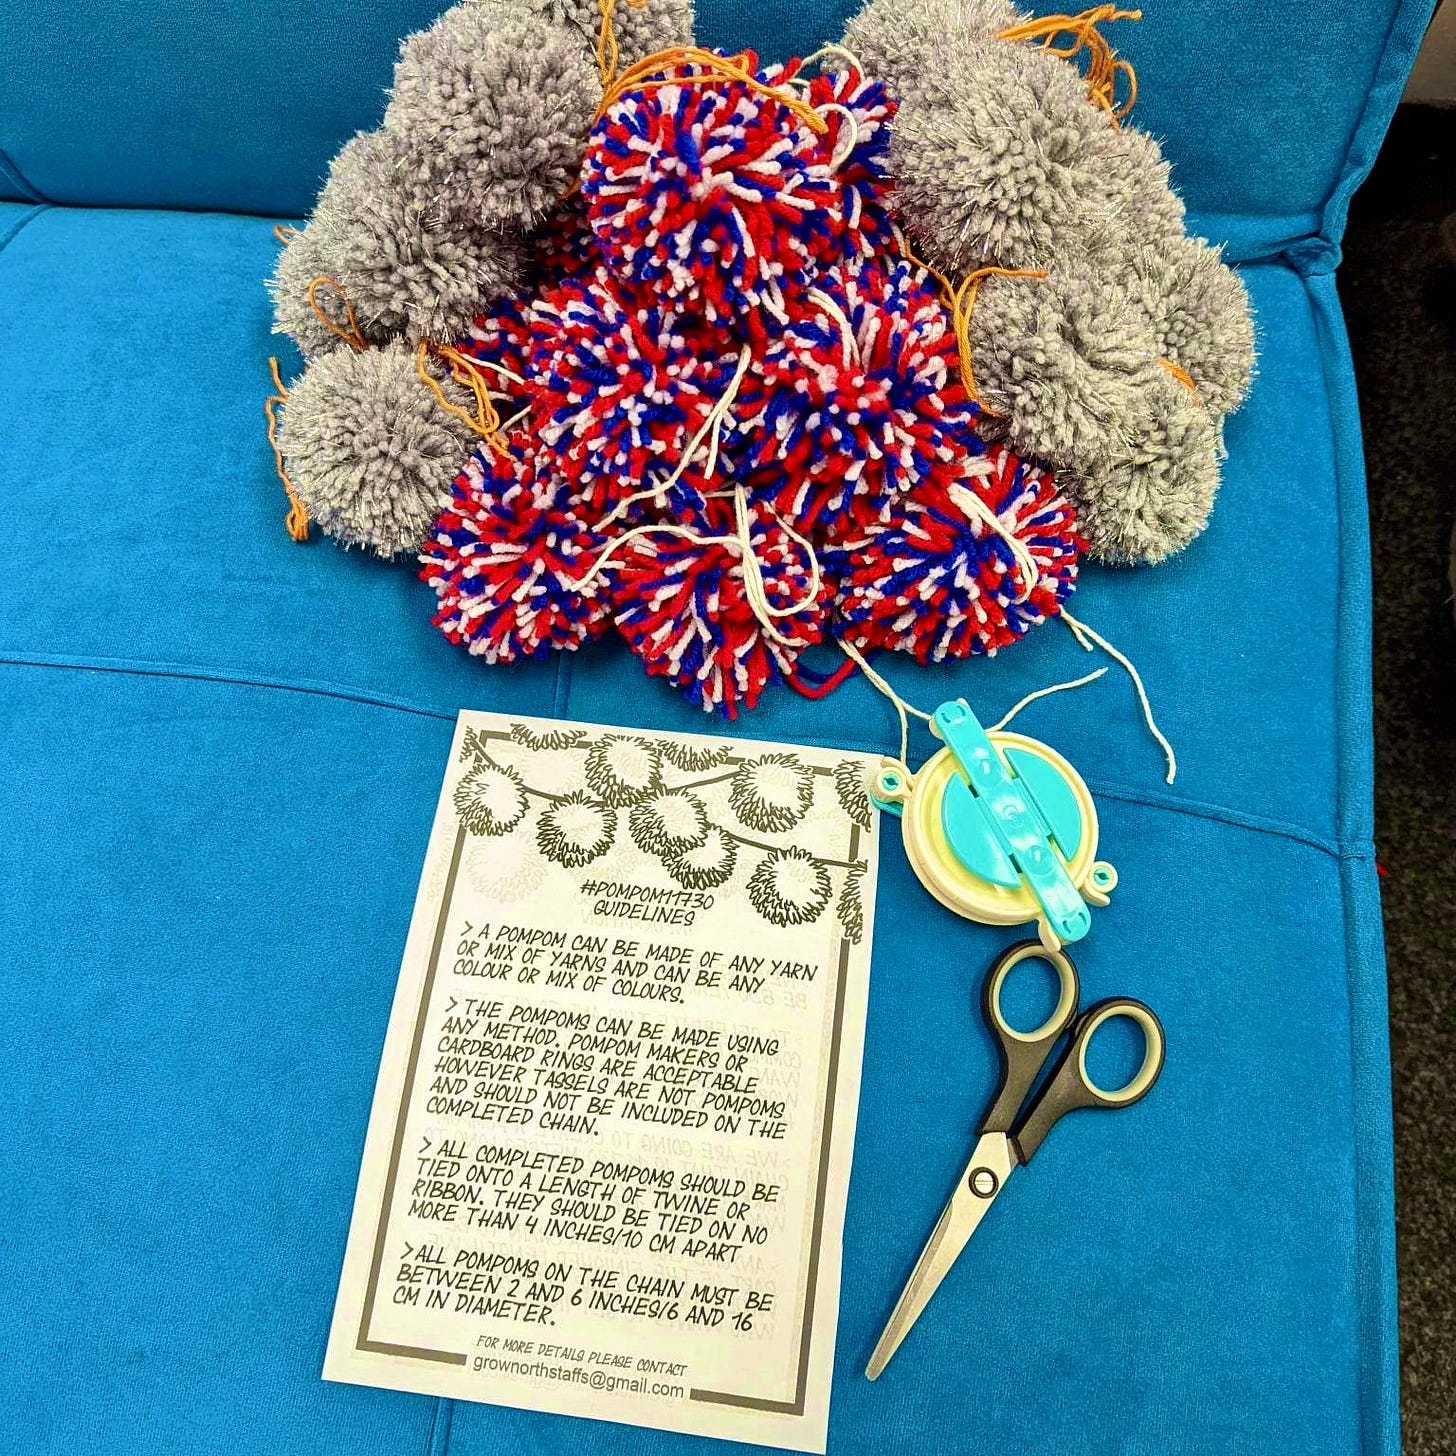 The pompom-making guidelines, with wool and scissors